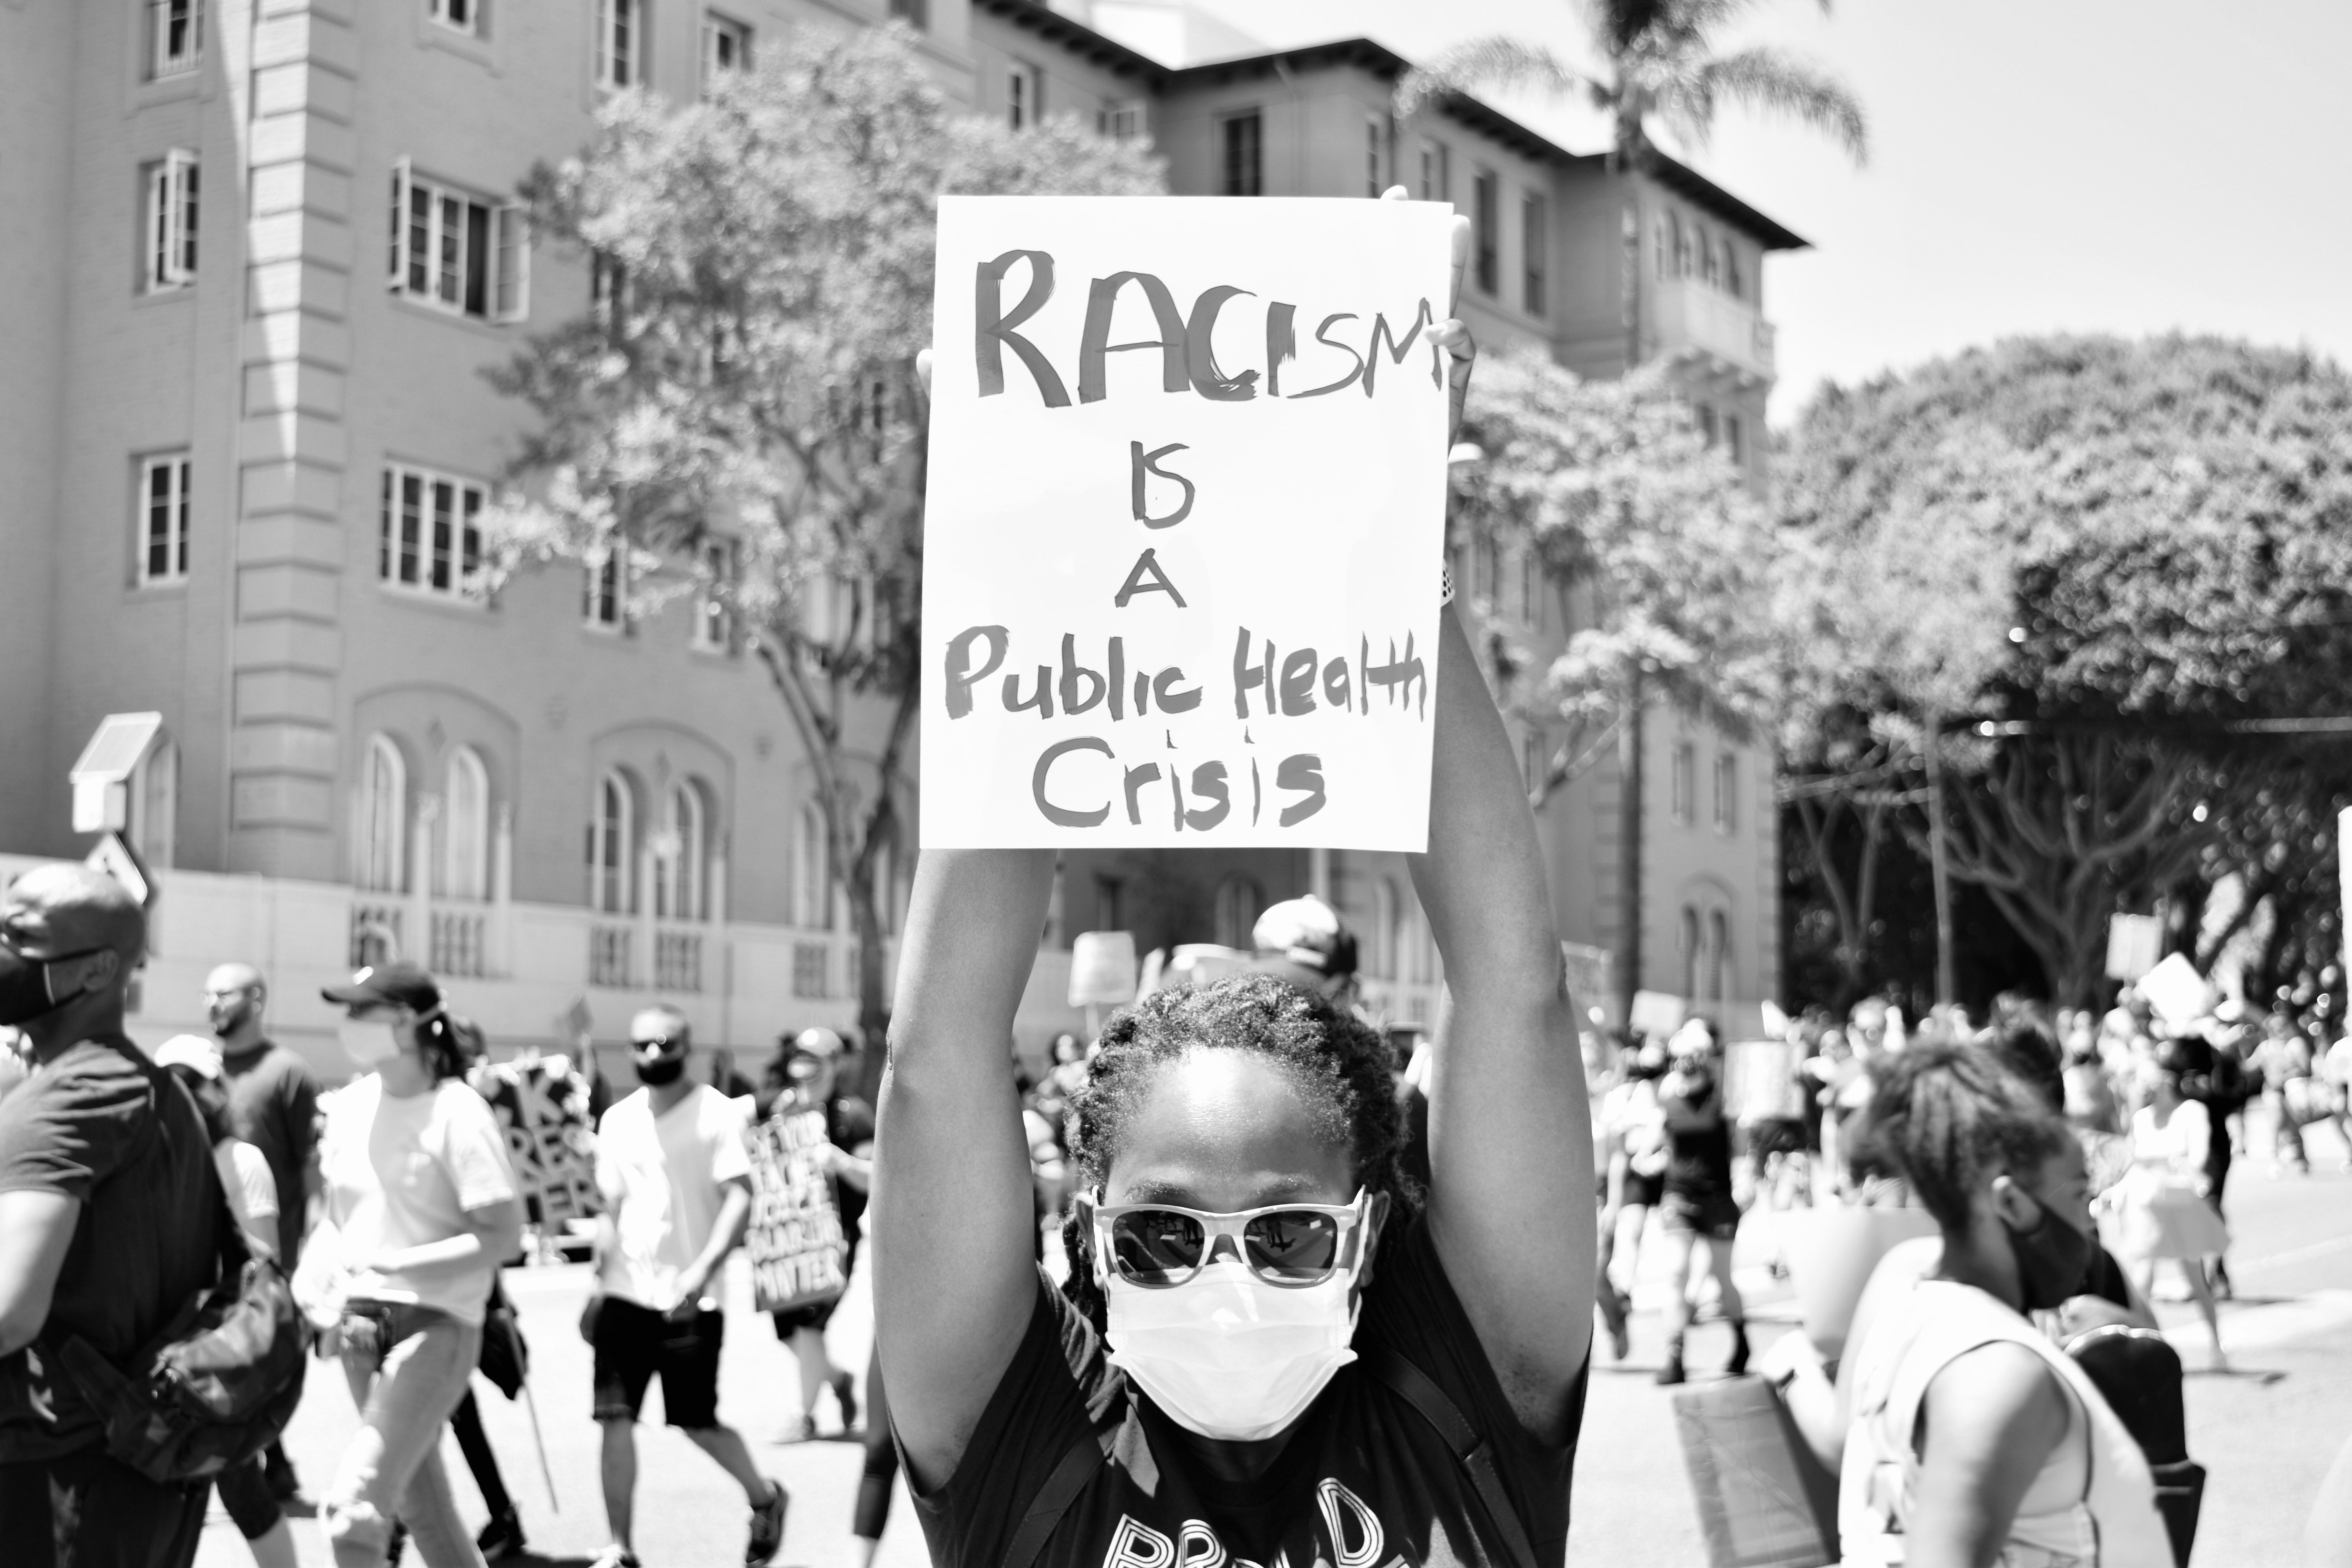 Photo of a Black Lives Matter protestor, holding up a sign that reads, "Racism is a Public Health Crisis." This person has long hair that appears to be in braids and pulled back behind their head.  They are wearing a mask due to the Covid-19 pandemic, as well as mirrored sunglasses.  They are facing the camera and holding the sign high above their head, while behind them dozens of people are marching and holding protest signs.